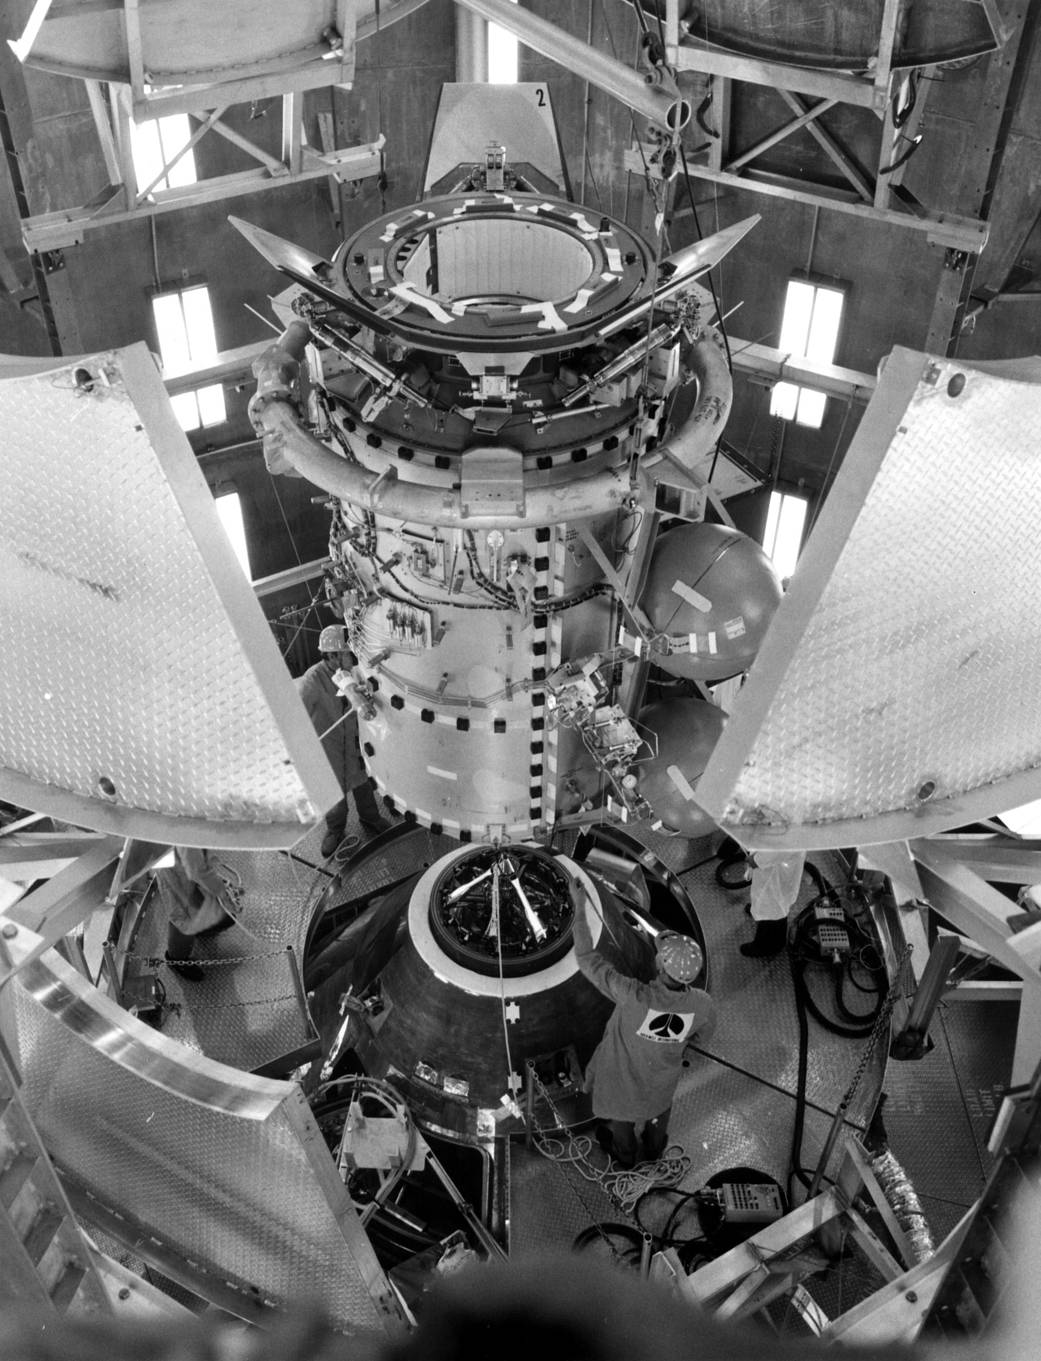 Fit checks are performed in an altitude chamber at Kennedy between the Apollo spacecraft and the docking module to be used during the Apollo-Soyuz Test Project.